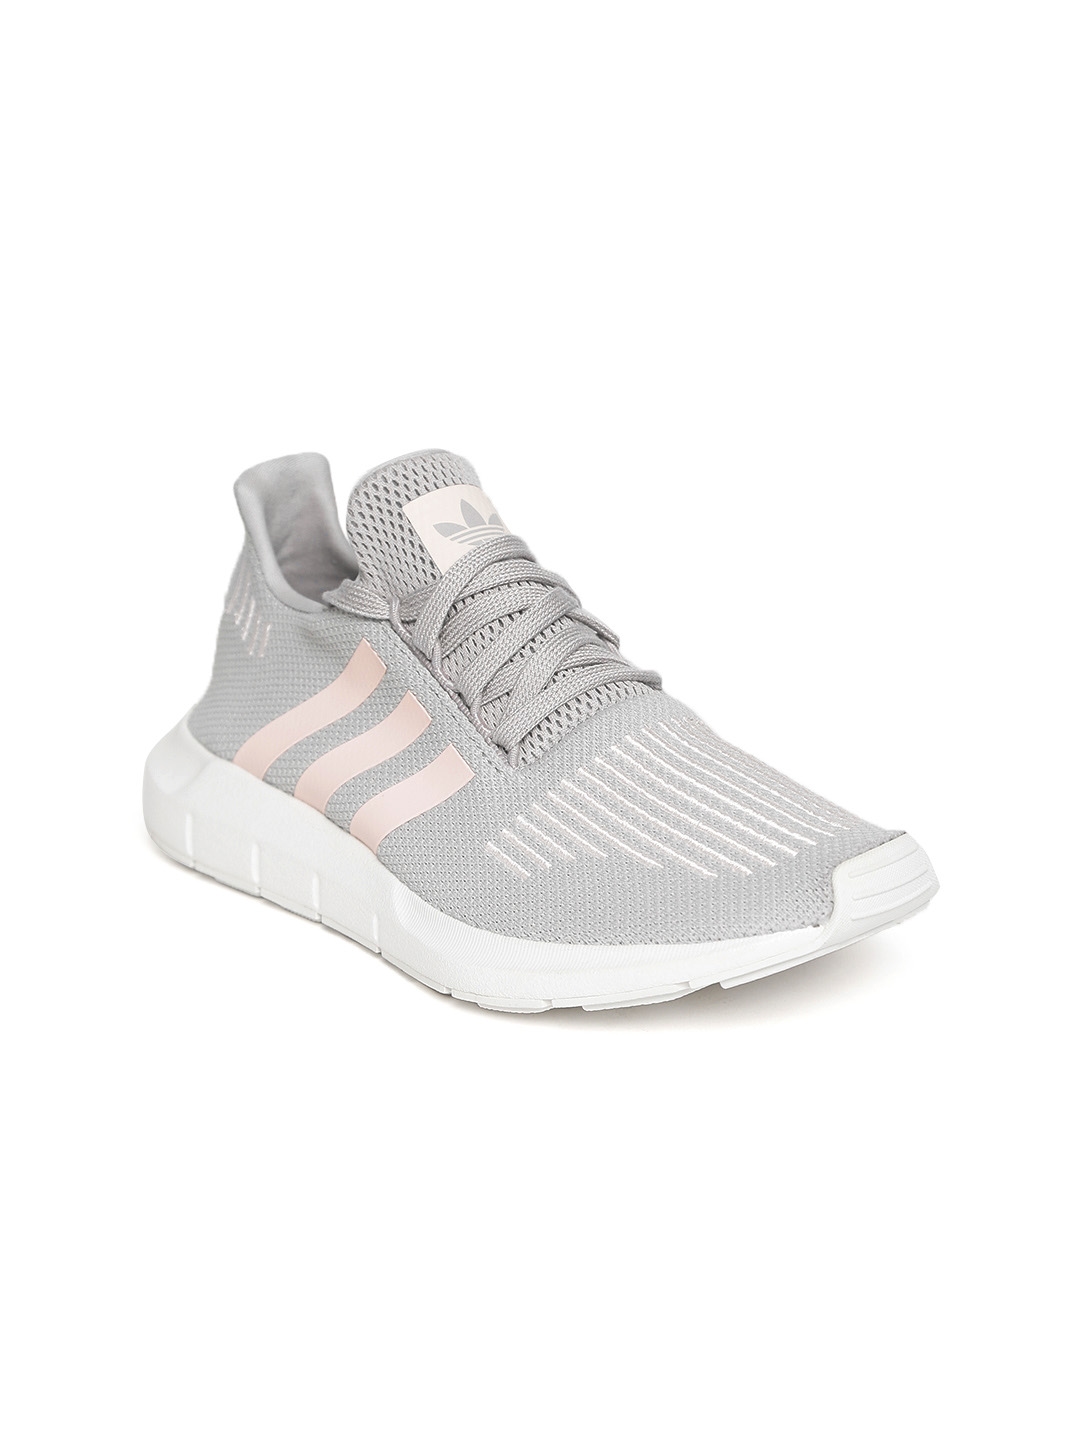 Marvel person landlord Buy Adidas Originals Women Grey Swift Run Sneakers - Casual Shoes for Women  | Myntra